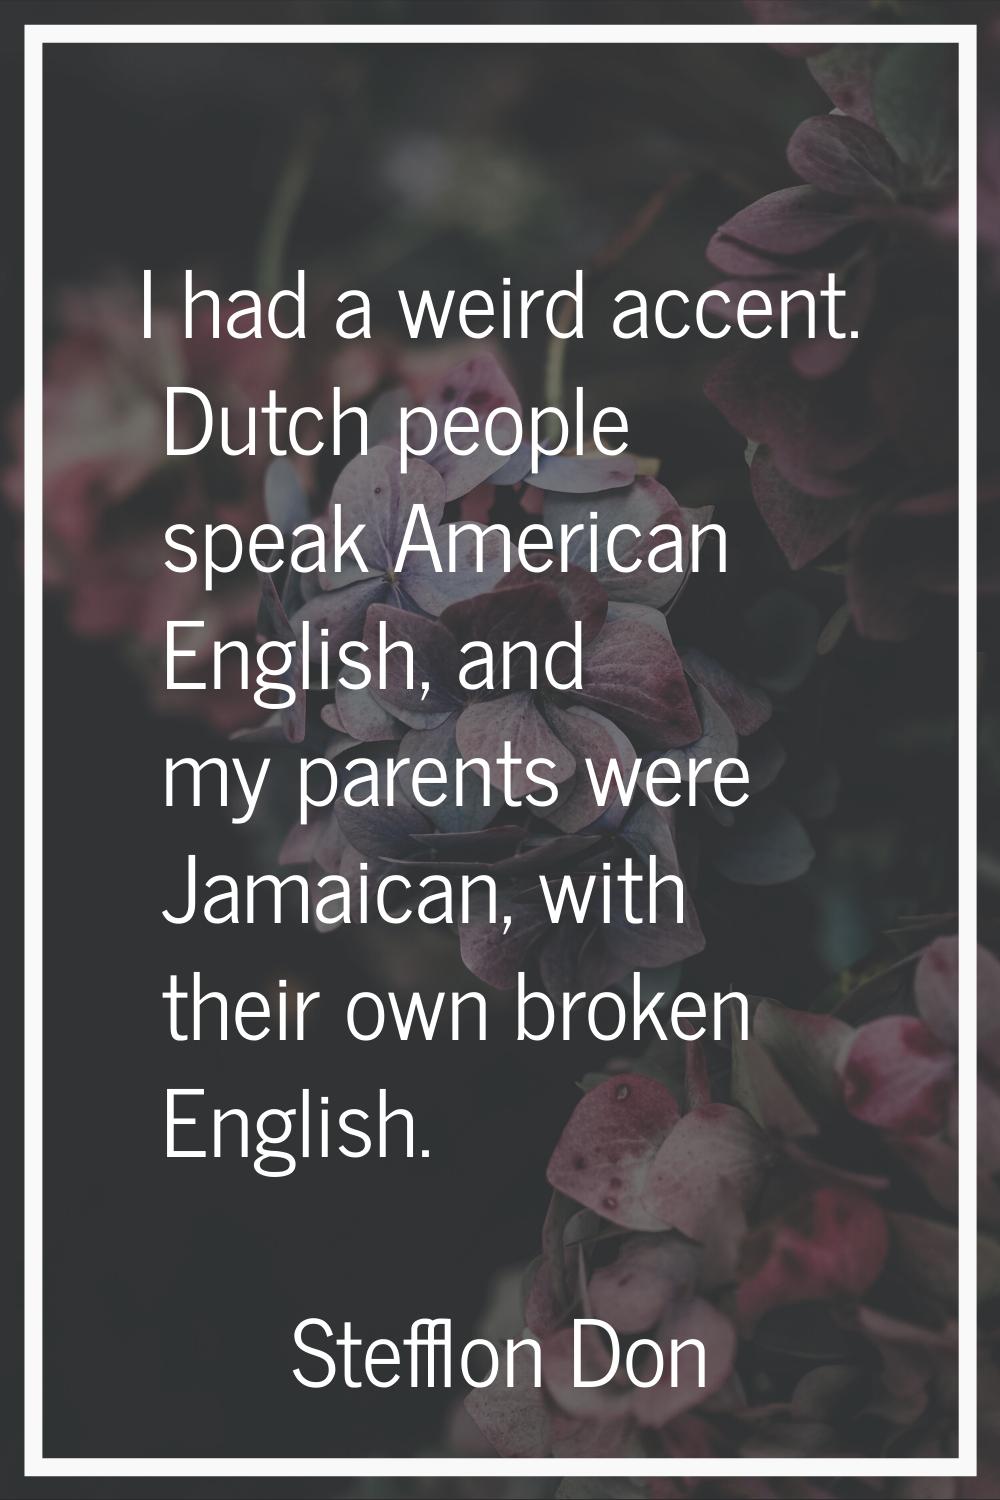 I had a weird accent. Dutch people speak American English, and my parents were Jamaican, with their